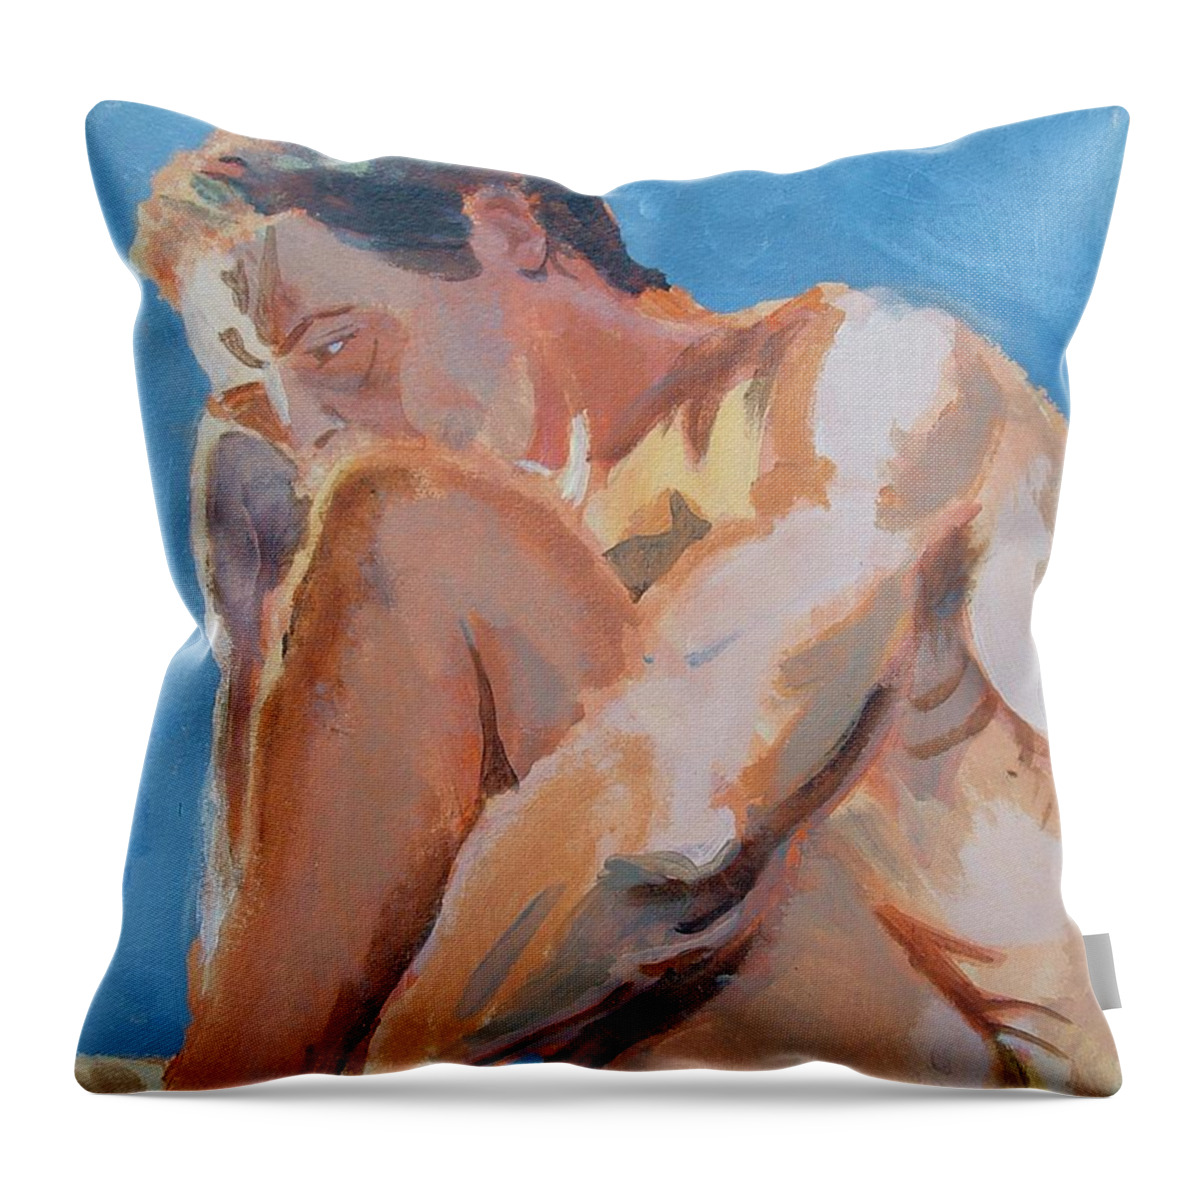 Male Nude Throw Pillow featuring the painting Male Nude Painting by Mike Jory